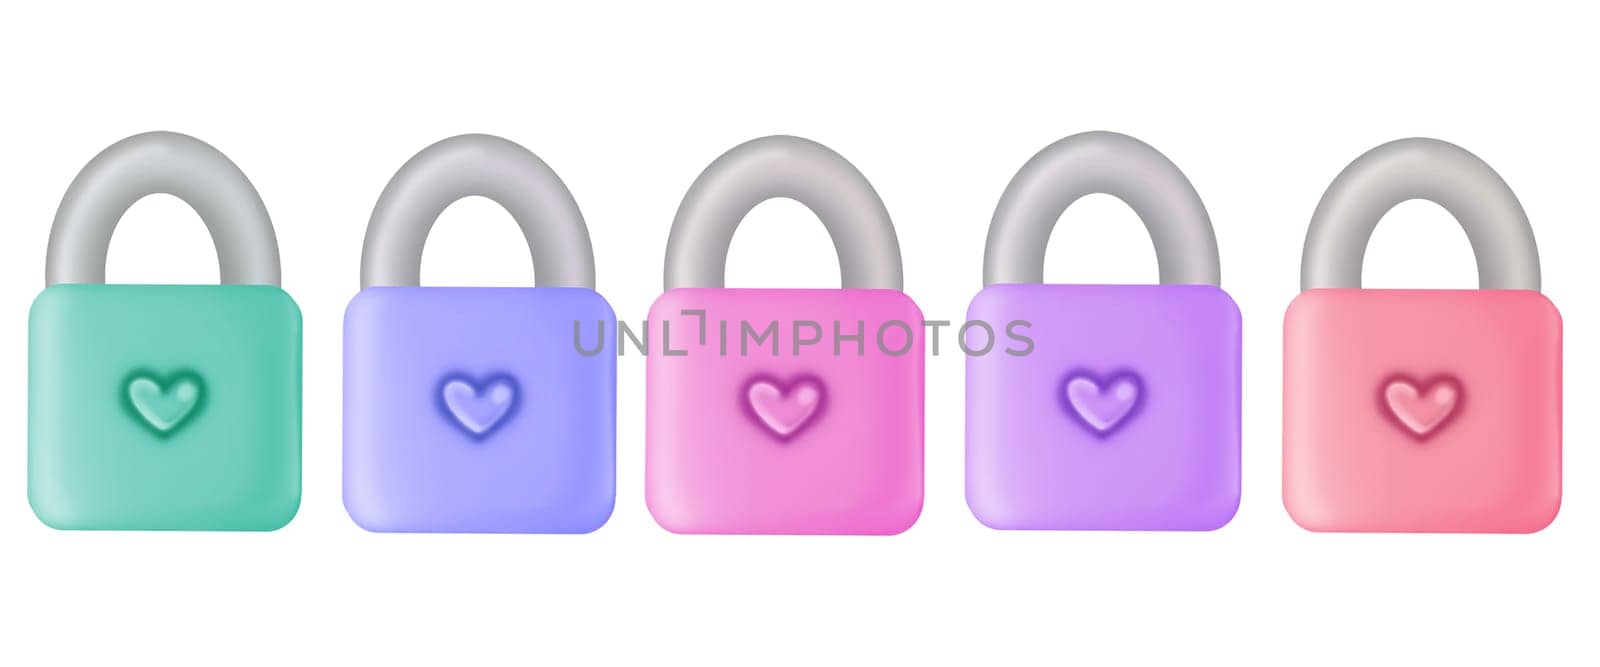 Set of various locks with hearts by Dustick